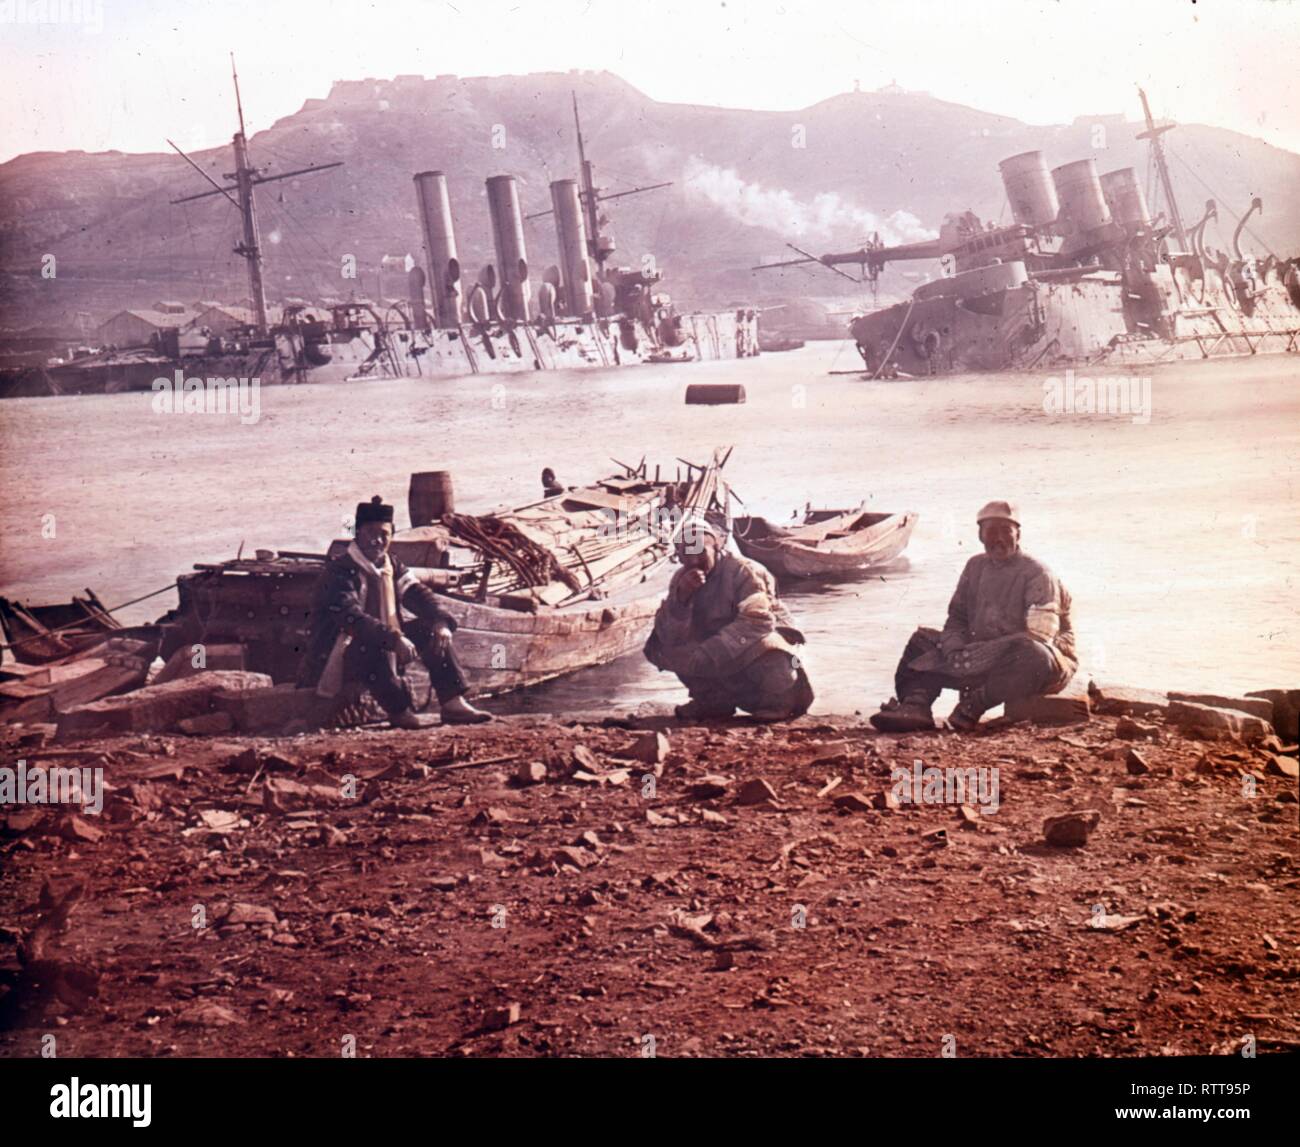 Colorized photo of three Japanese soldiers sitting on a beach alongside the Port Arthur harbor near a Russian warship sunken during the Russo-Japanese War, Port Arthur, China, 1905. (Photo by Burton Holmes) Stock Photo